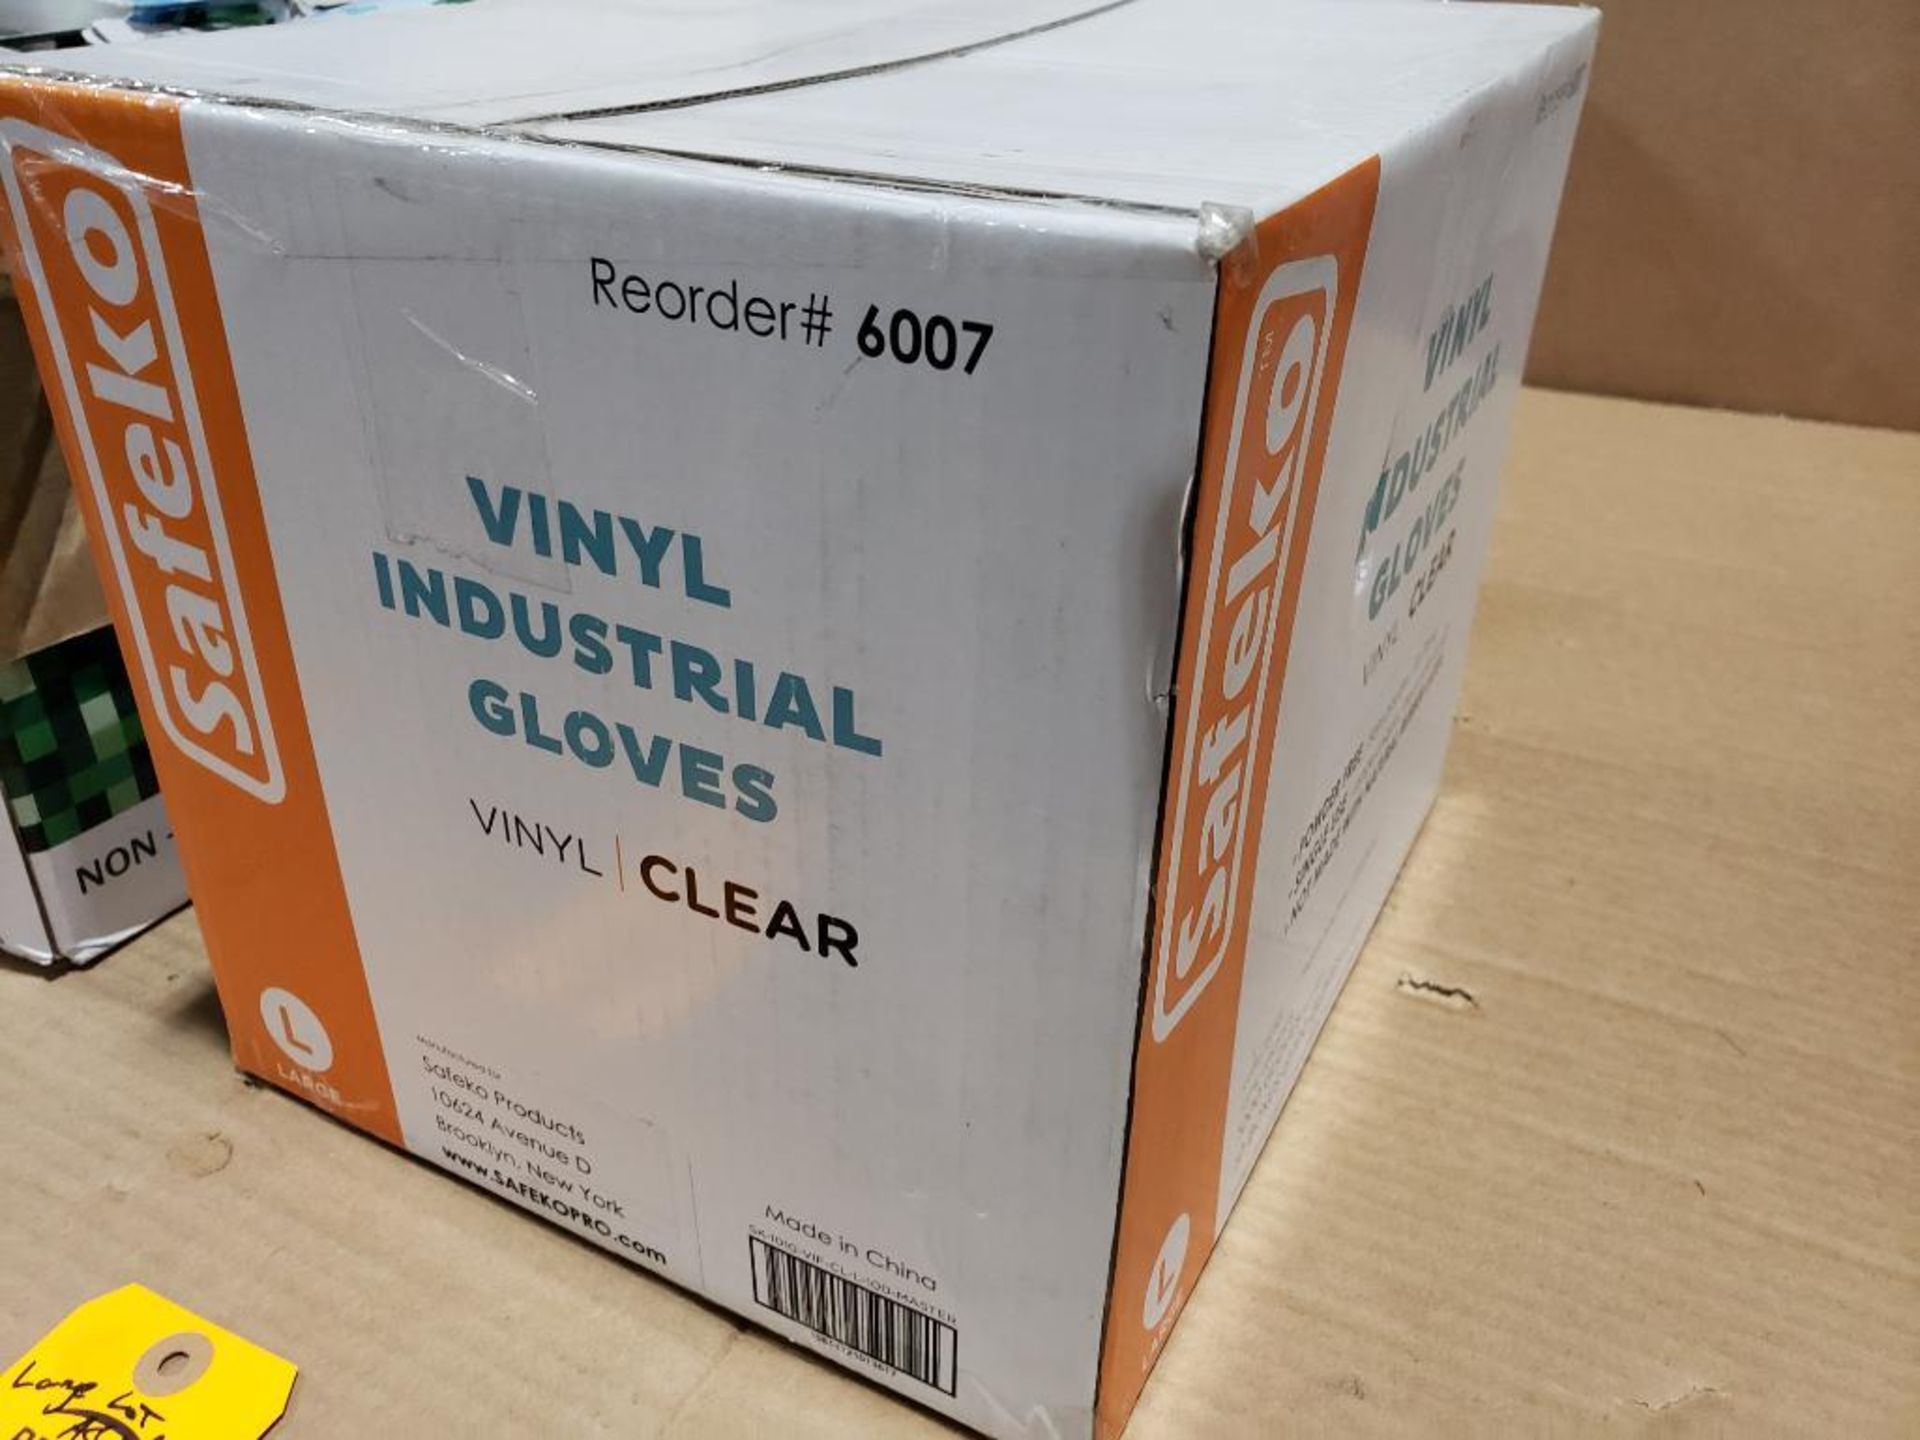 Large qty of vinyl gloves. - Image 14 of 14